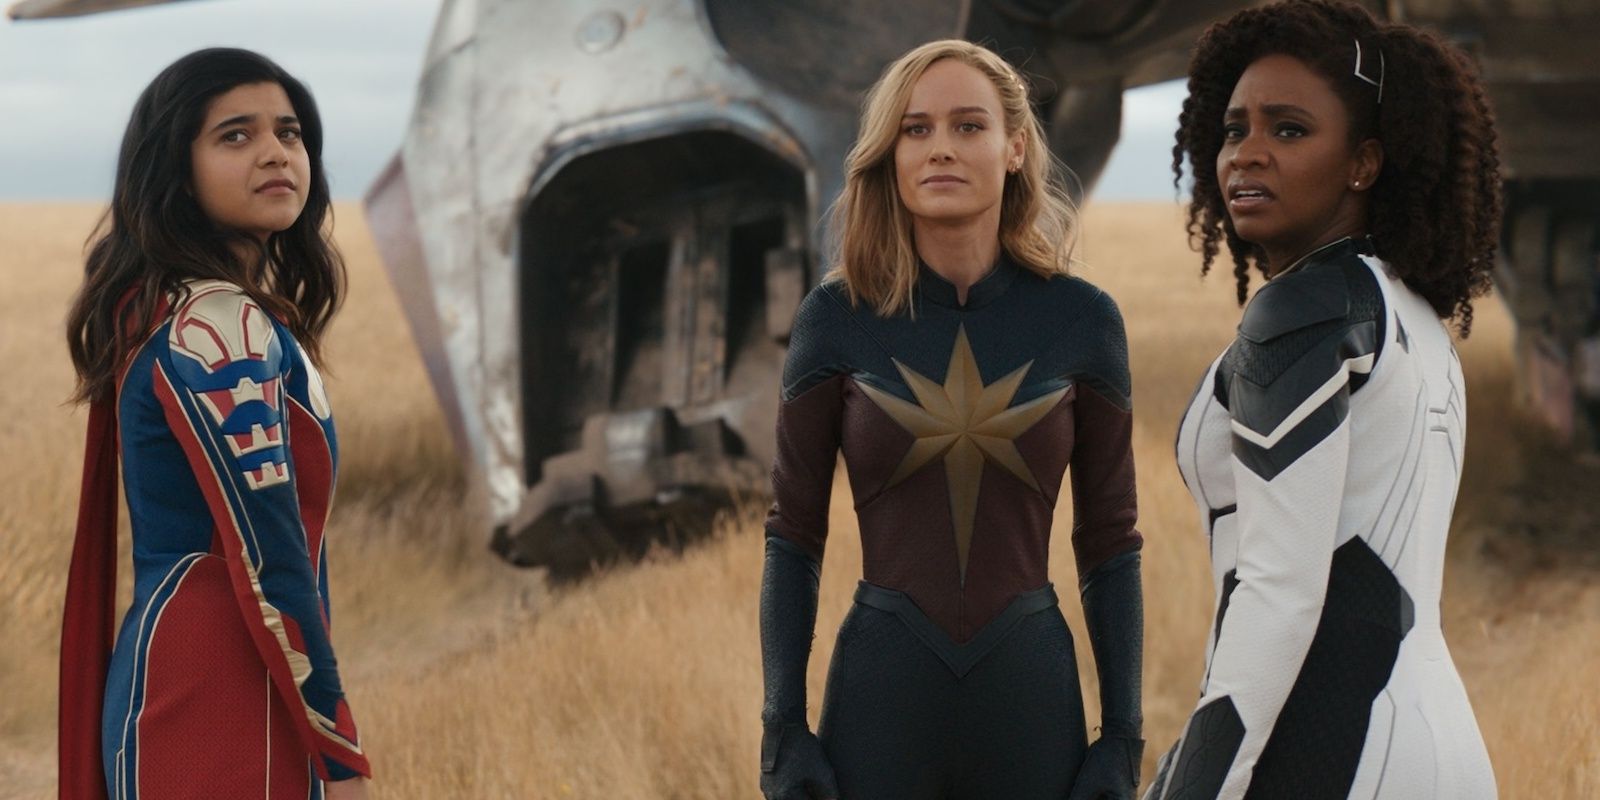 Ms. Marvel (Iman Vellani), Captain Marvel (Brie Larson), and Monica Rambeau (Teyonah Parris) in The Marvels